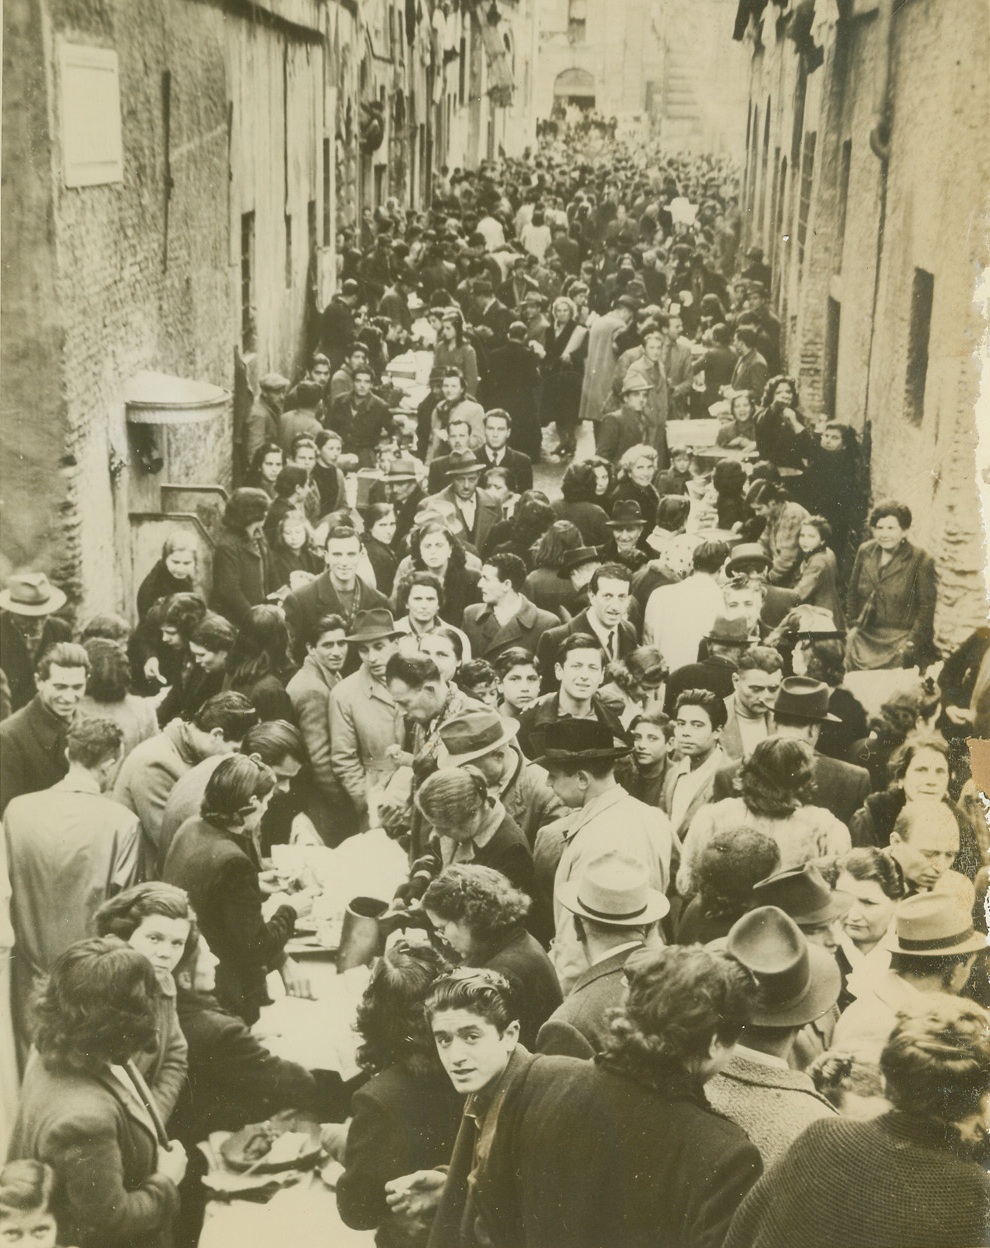 BLACK MARKET OPERATES IN BROAD DAYLIGHT, 1/2/1945. ROME, ITALY – At Via Tor di Nona, one of Rome’s chief black markets, business is going on as usual. There was a slight slackening of pace following several recent incidents where black market pastry shops were looted, but in two or three days the crowd was back in full force. Credit: ACME;